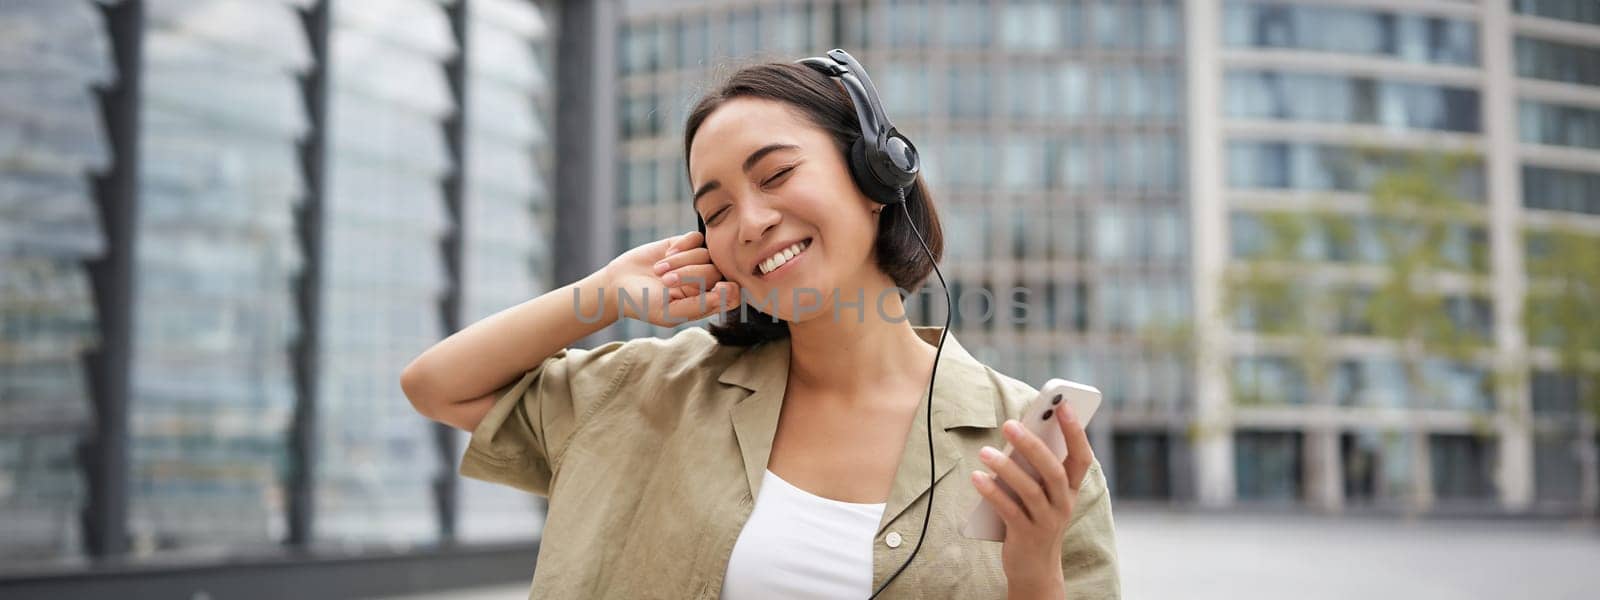 Happy young woman dancing on streets and listening music in headphones, holding smartphone.